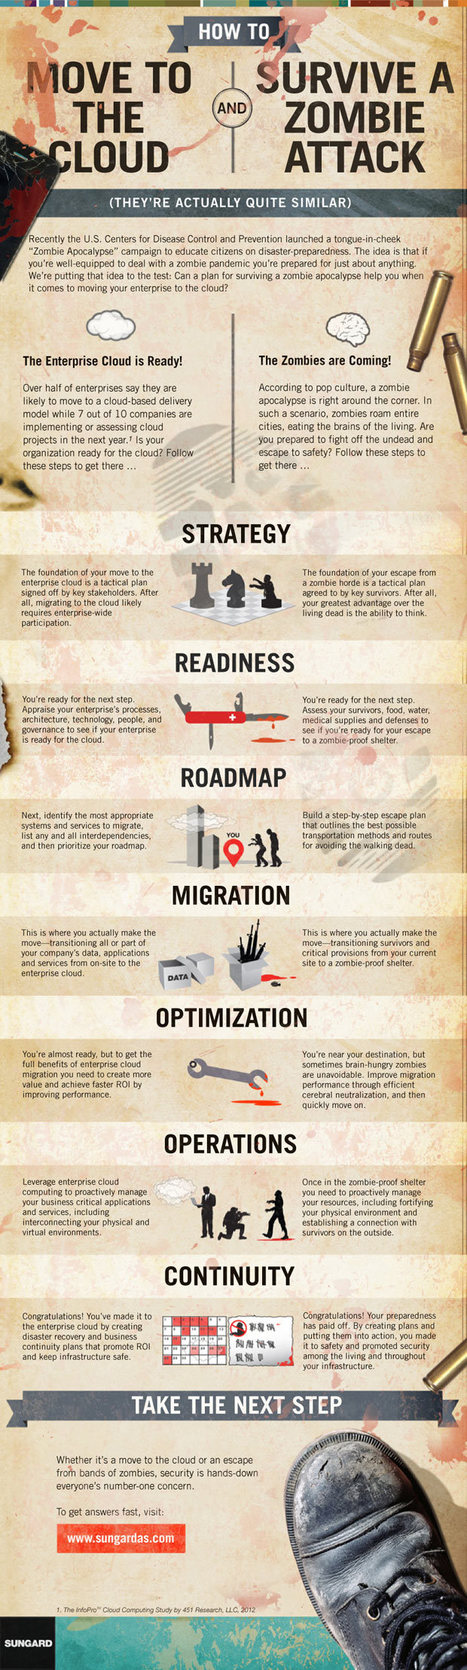 INFOGRAPHIC: How Moving to the Cloud is Similar to Surviving a Zombie Attack | MarketingHits | Scoop.it